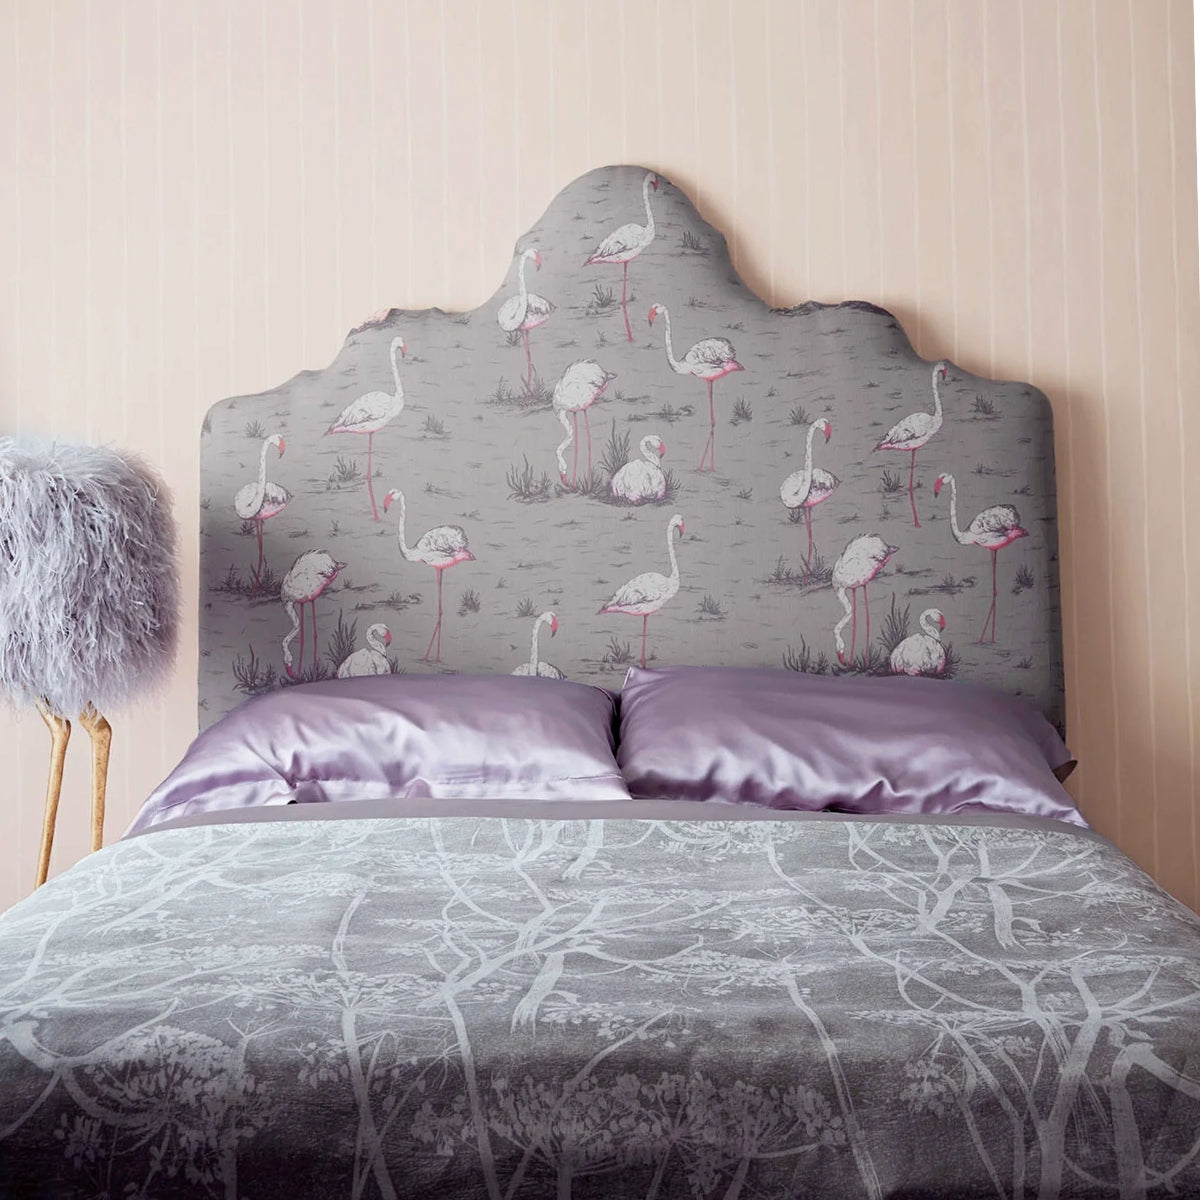 Cole &amp; Son &#39;Cow Parsley Linen - White &amp; Taupe&#39; Fabric